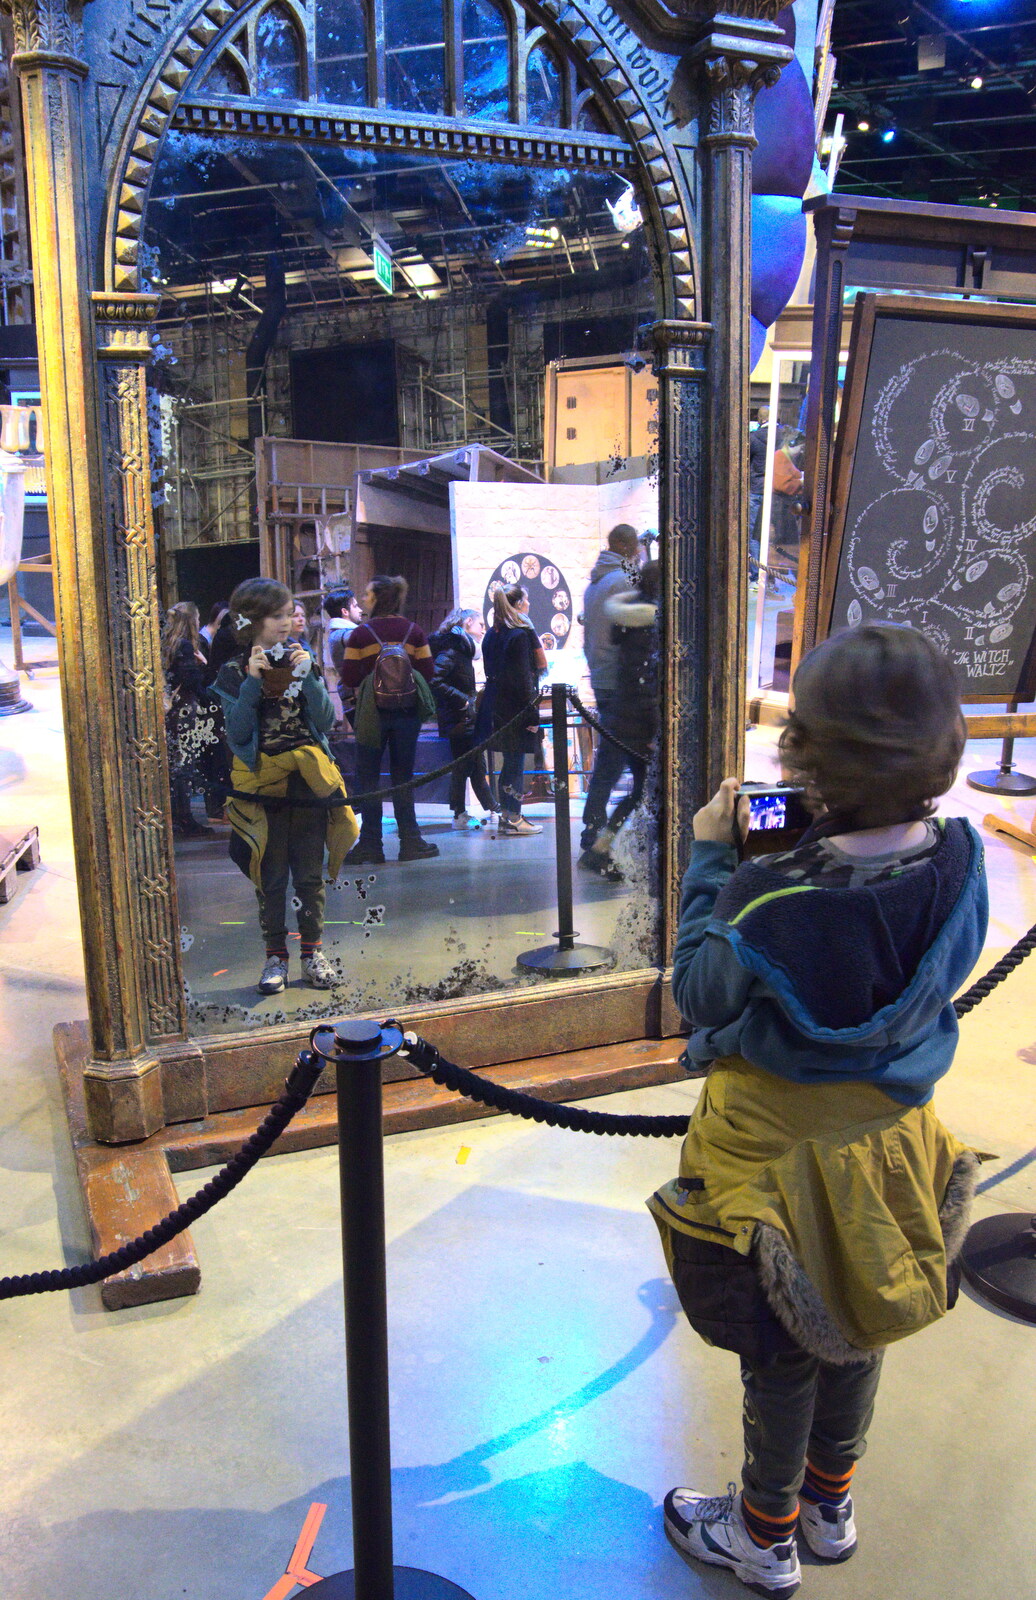 Fred in the mirror from A Trip to Harry Potter World, Leavesden, Hertfordshire - 16th February 2020